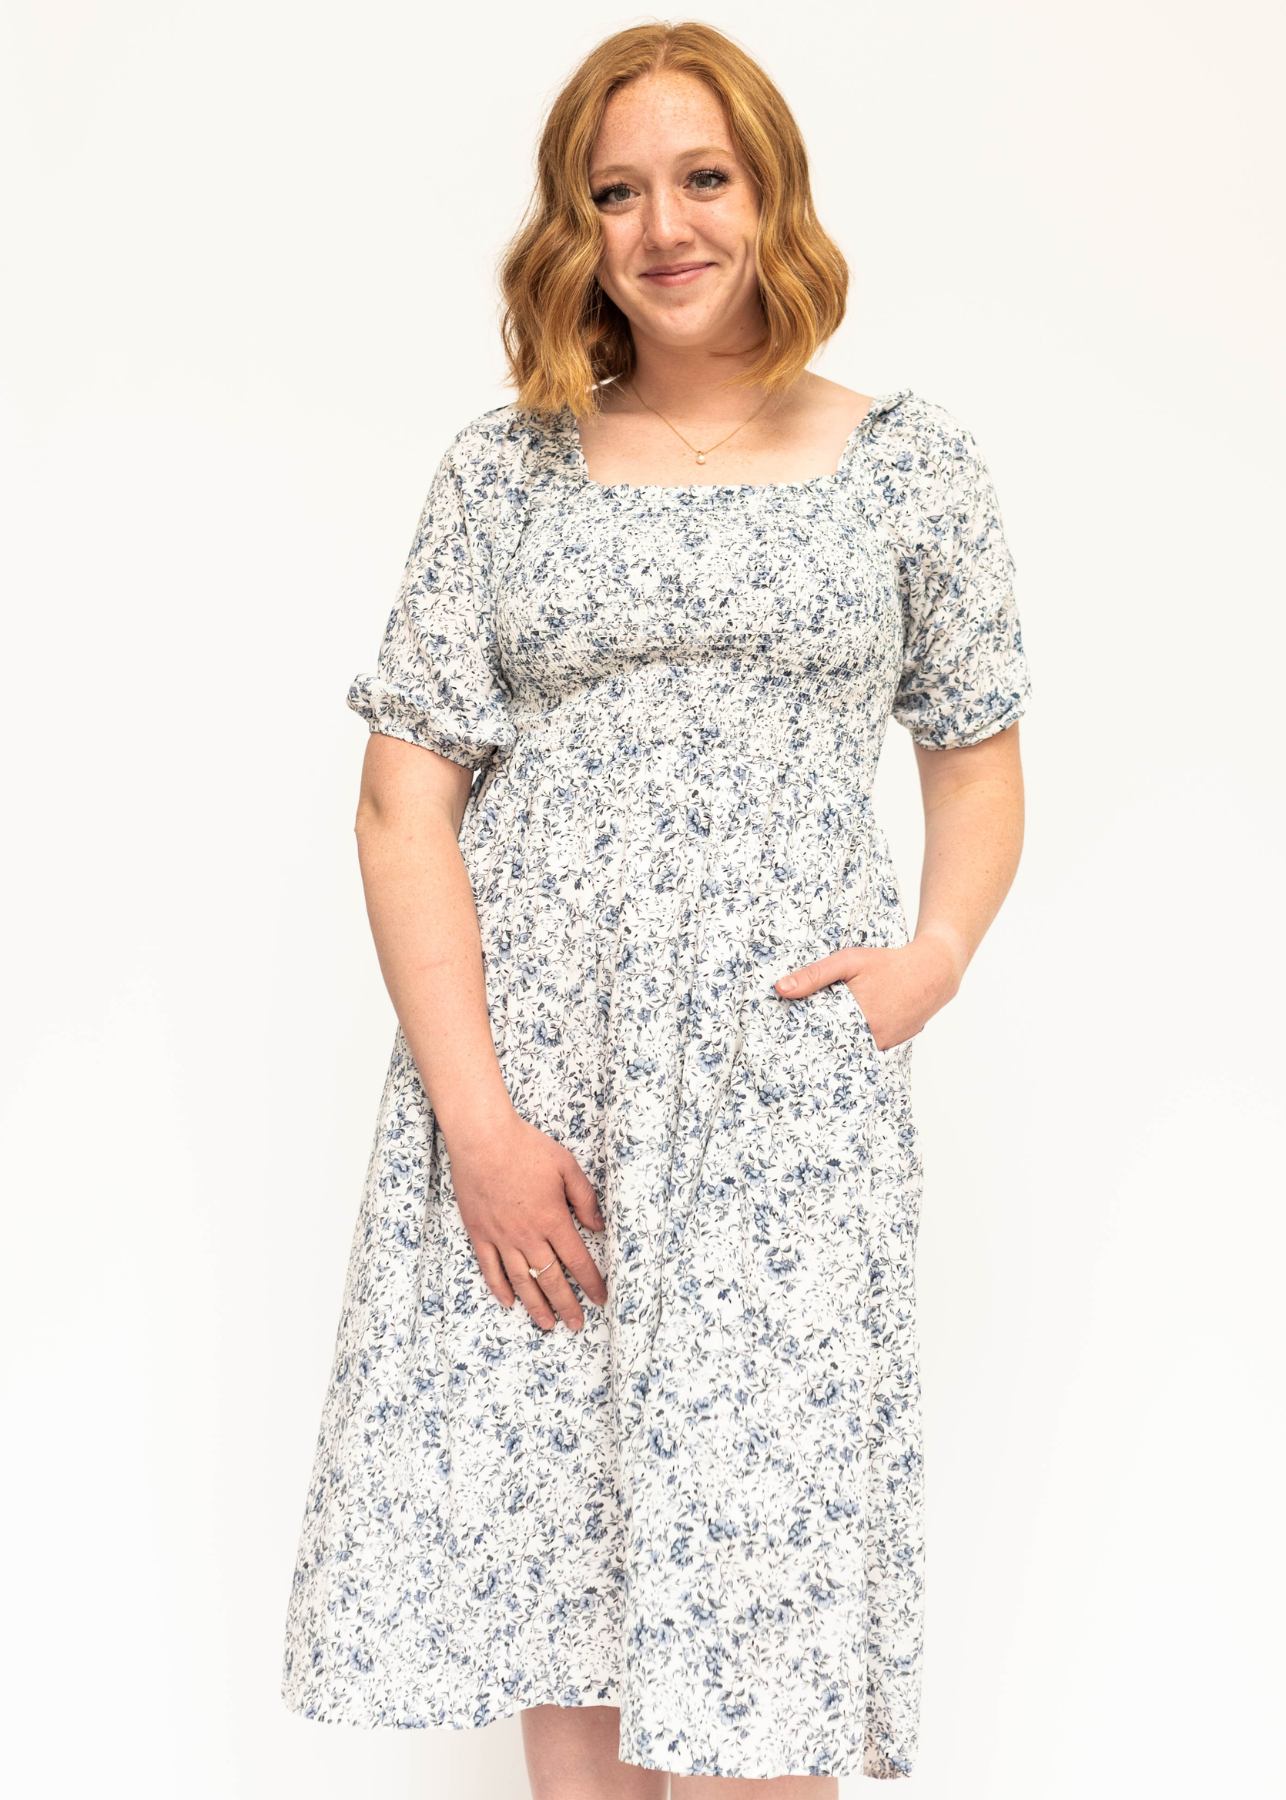 Blue and white short sleeve floral dress with a smocked bodice.